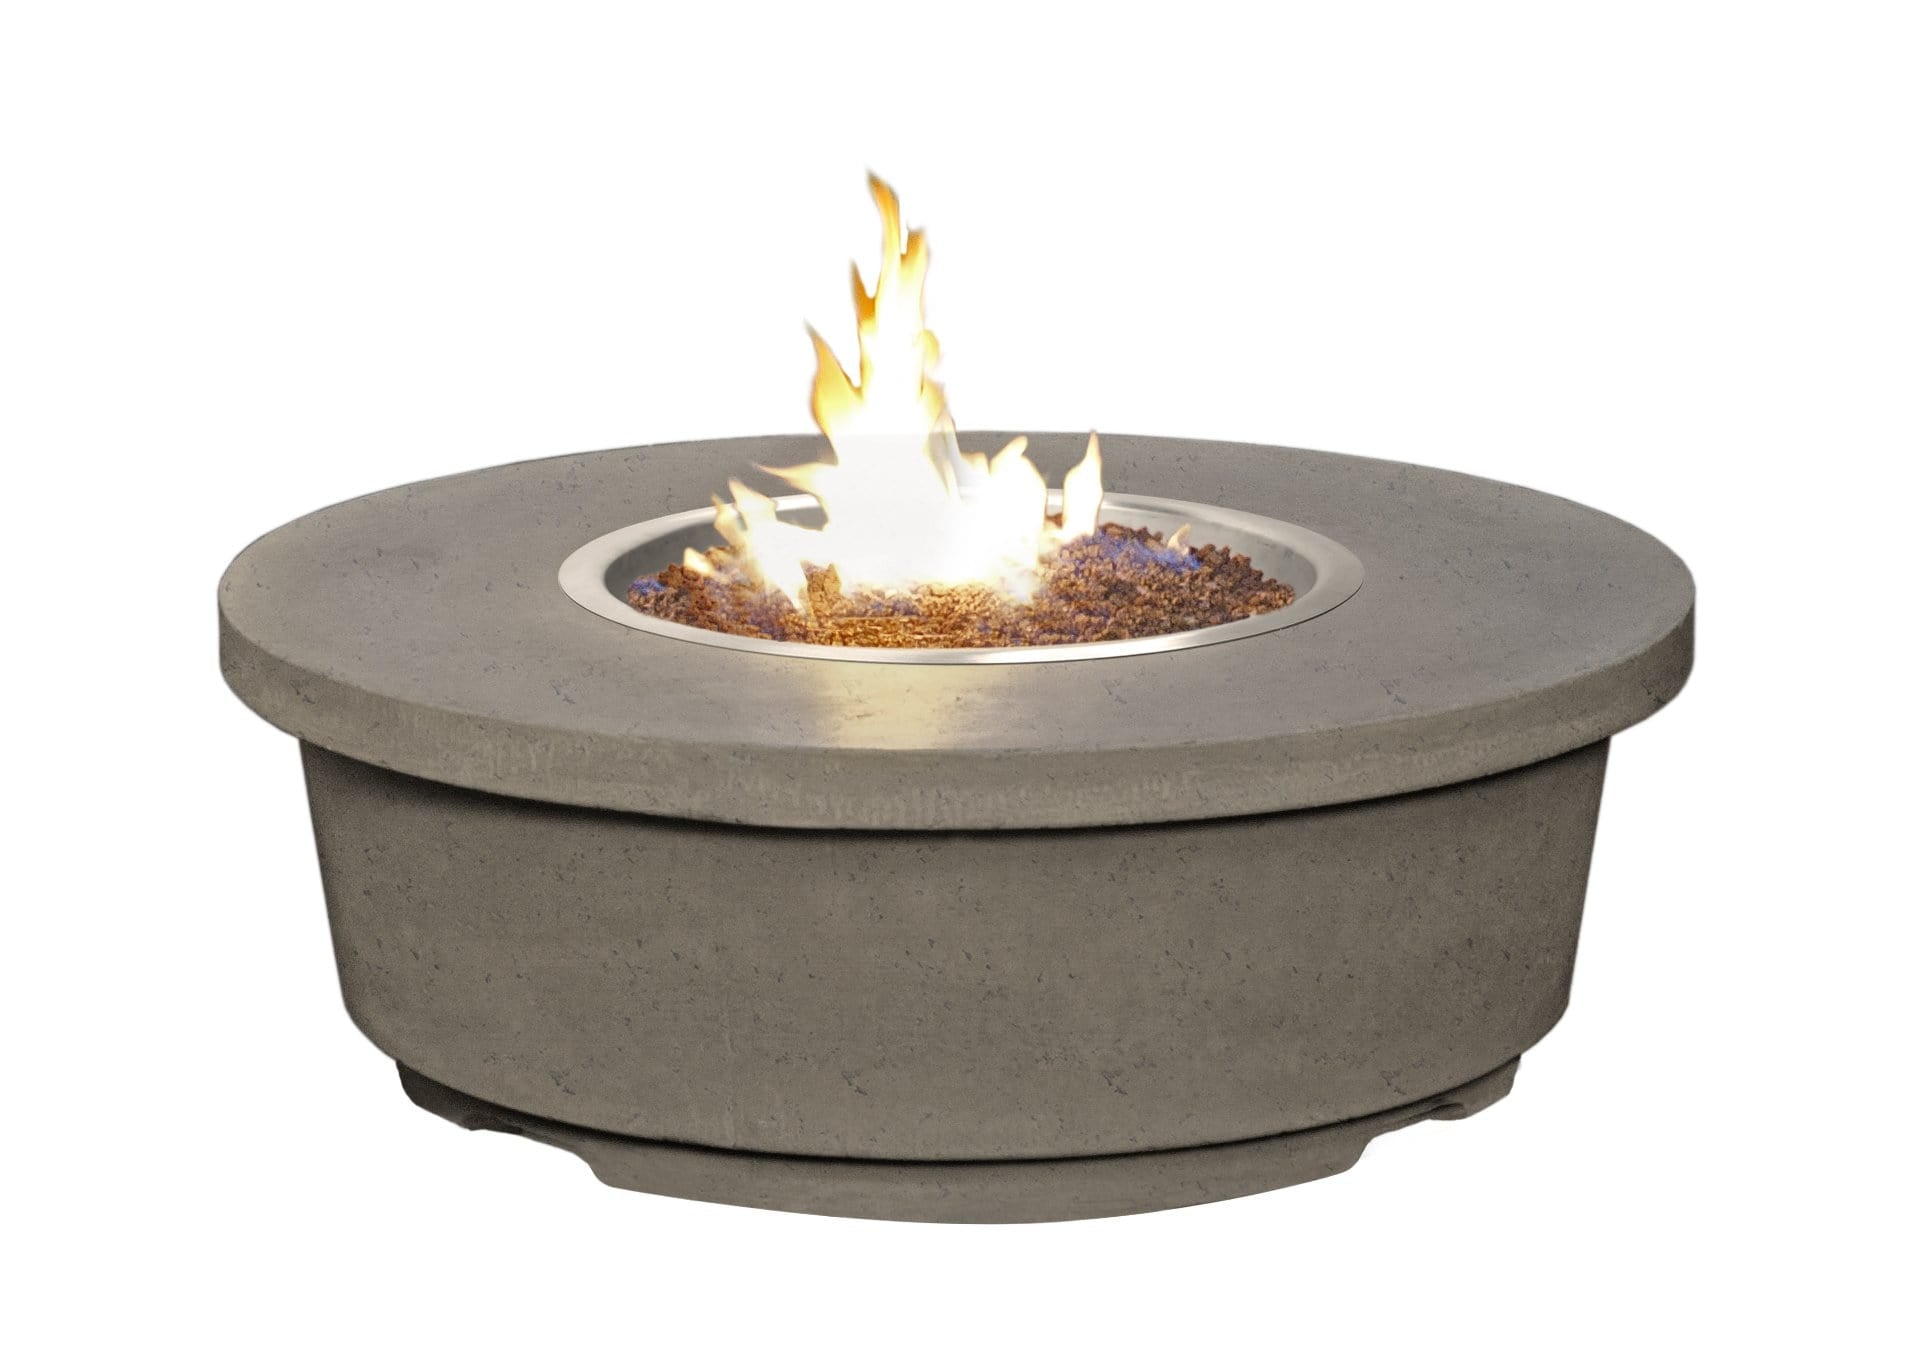 American Fyre Designs Fire Features American Fyre Designs 47" Contempo Round Gas Firetable / 782-xx-11-M2NC, 782-xx-11-M2PC, 782-xx-11-F2NC, or 782-xx-11-F2PC